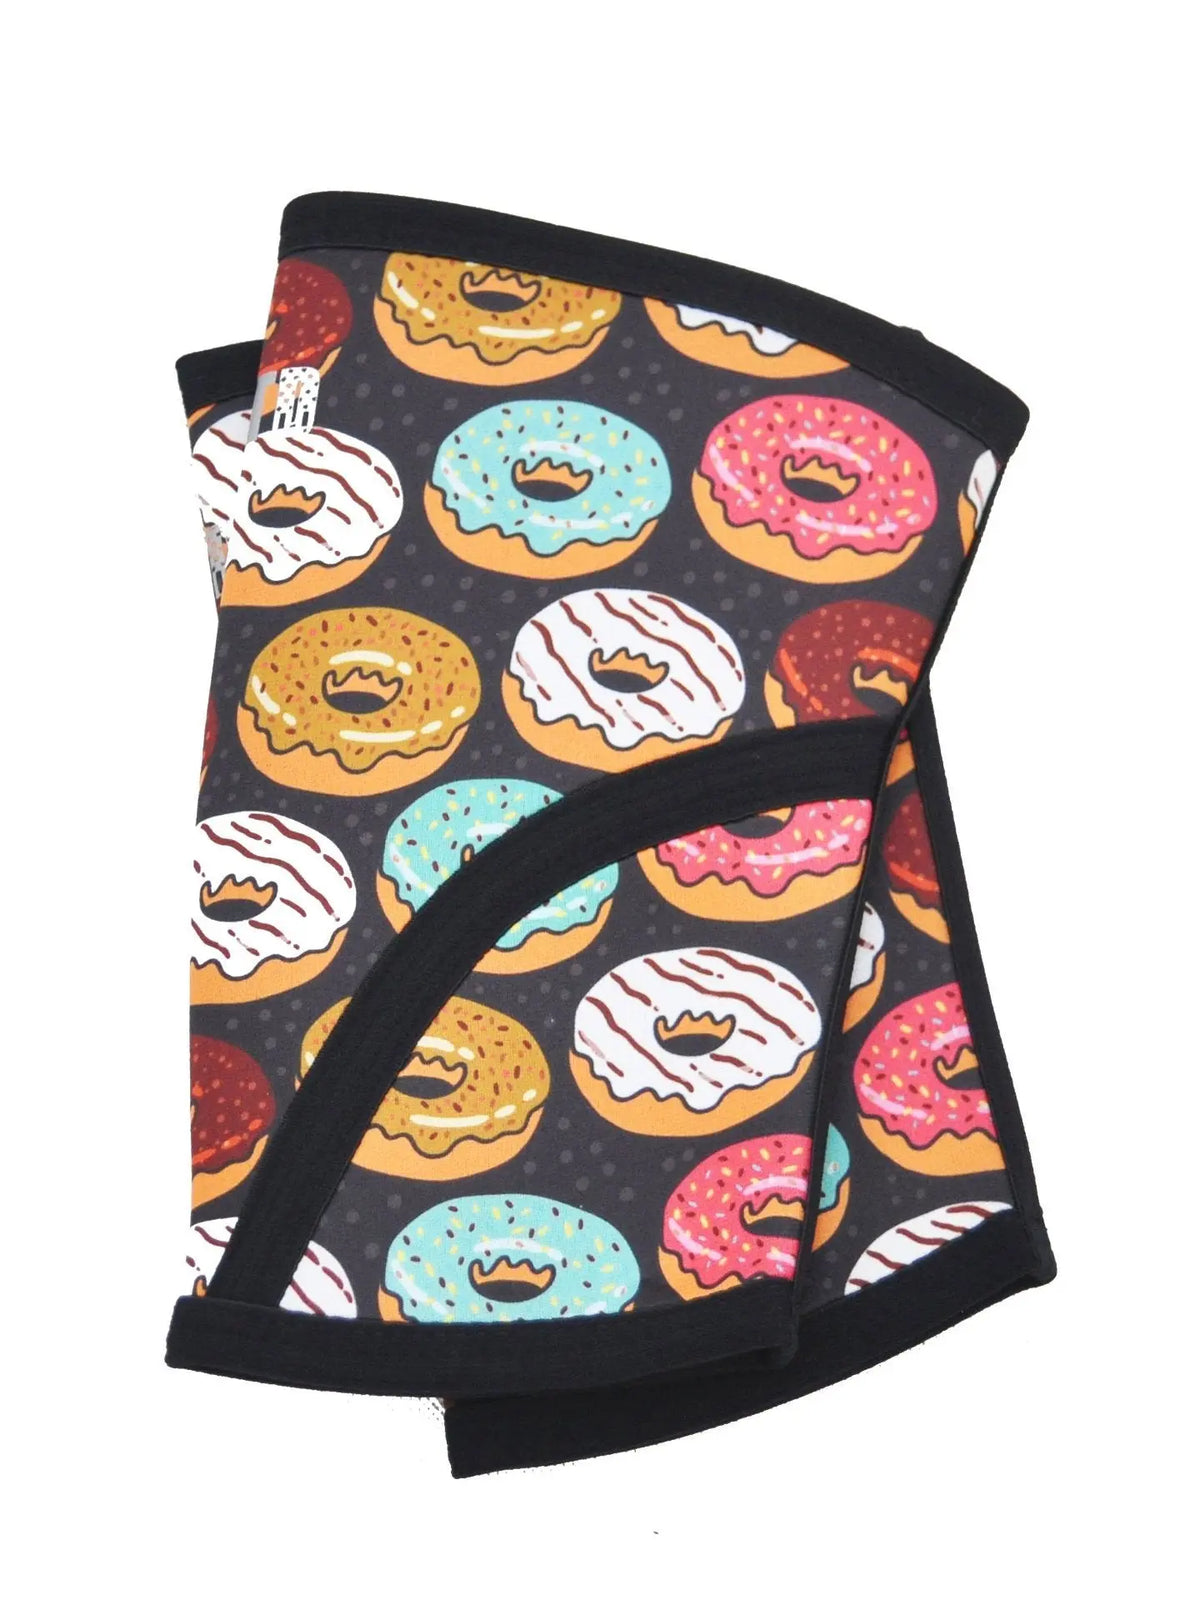 Donut Judge Me Knee Sleeves Lifting the Dream